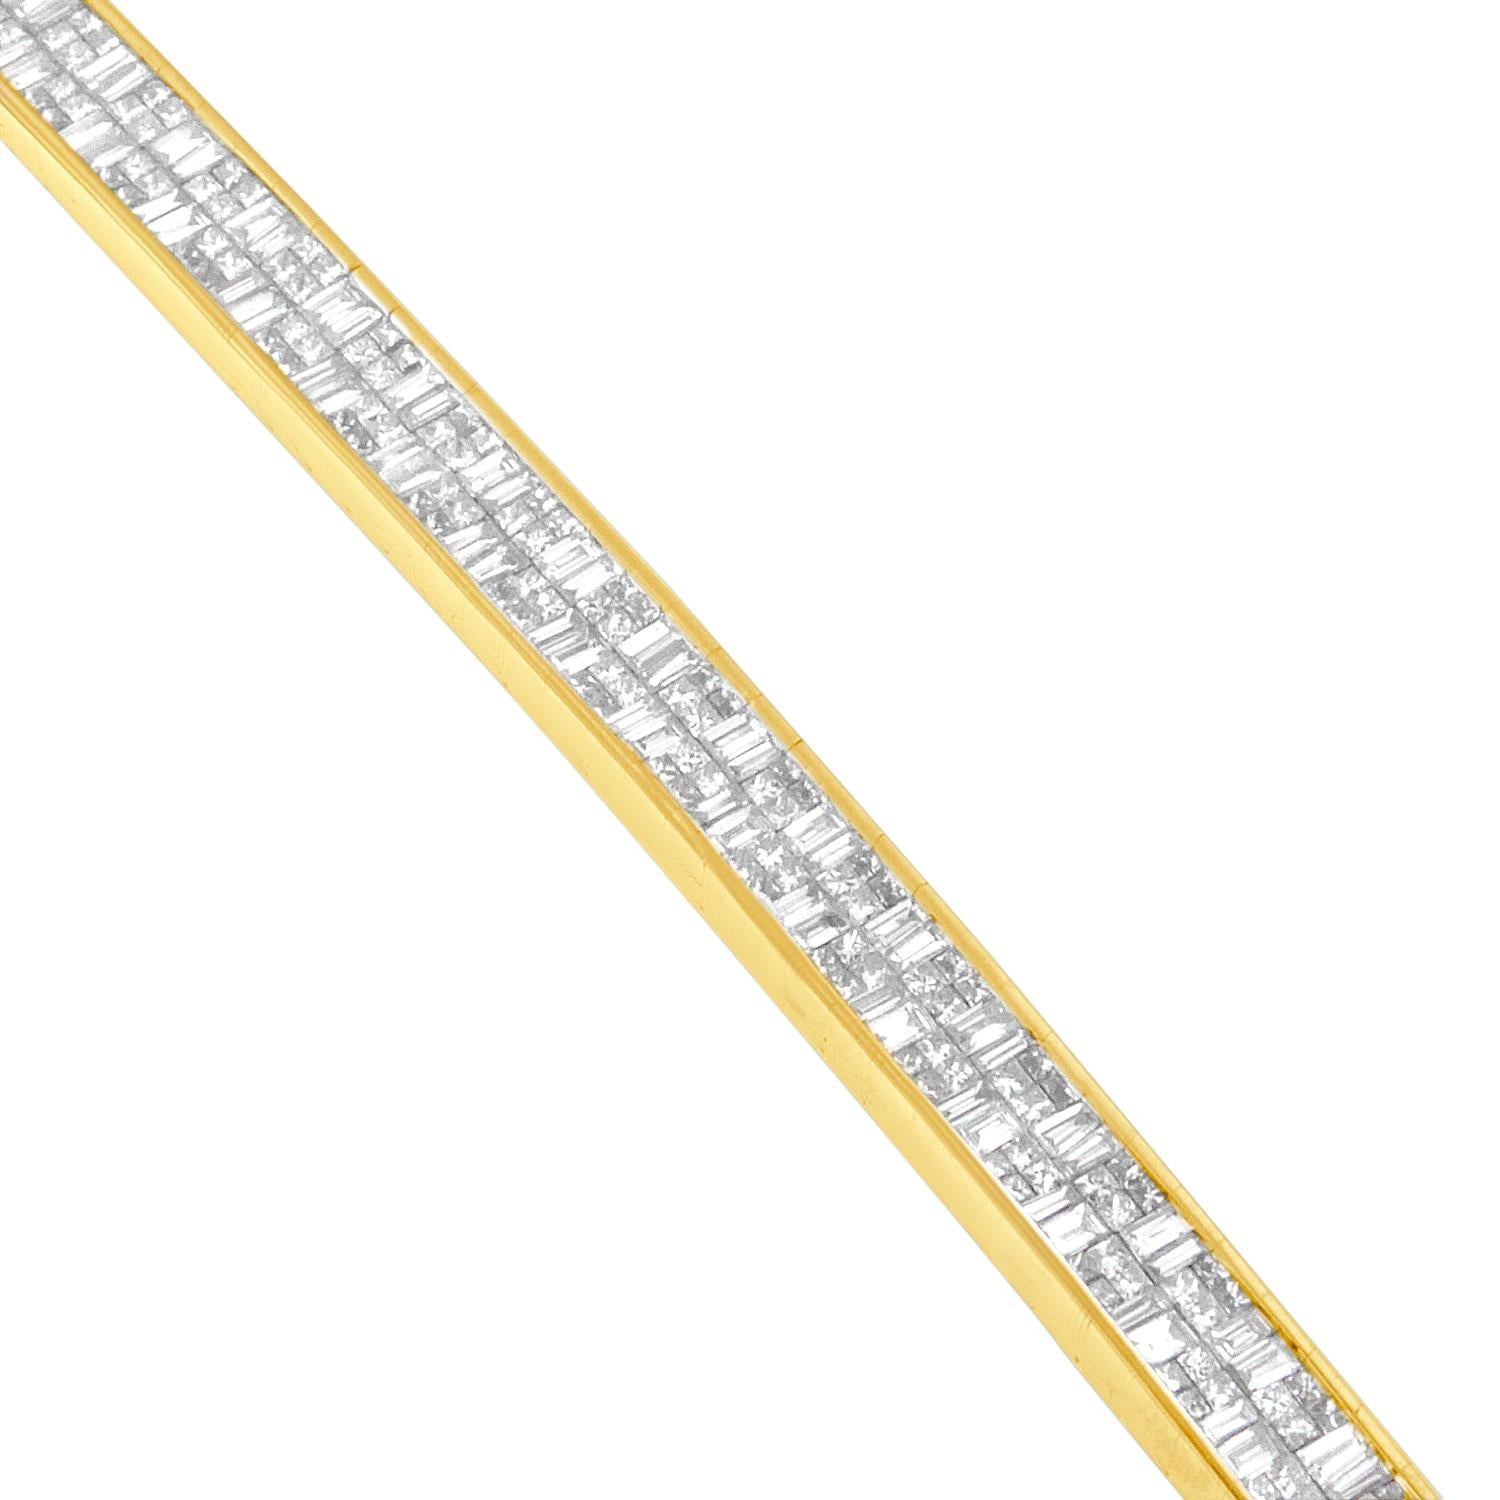 What a stunner!  This gorgeous 14k yellow gold eternity bracelet  showcases two rows of alternating baguette and princess cut diamonds.  Each link is carefully crafted to maximize brilliance while maintaining comfort.  Imagine fastening the box